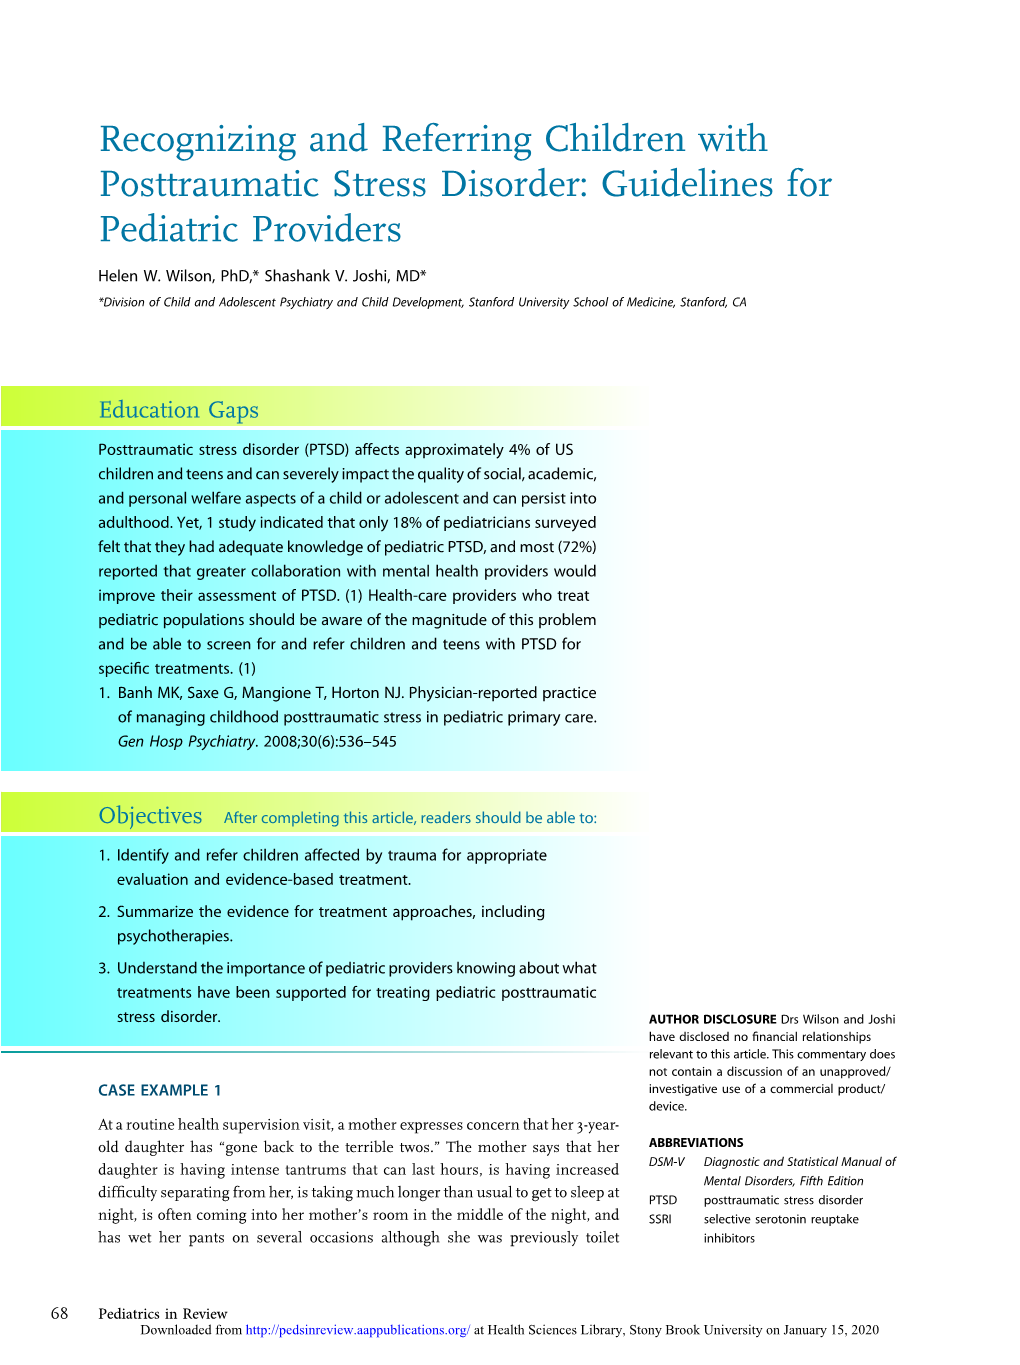 Recognizing and Referring Children with Posttraumatic Stress Disorder: Guidelines for Pediatric Providers